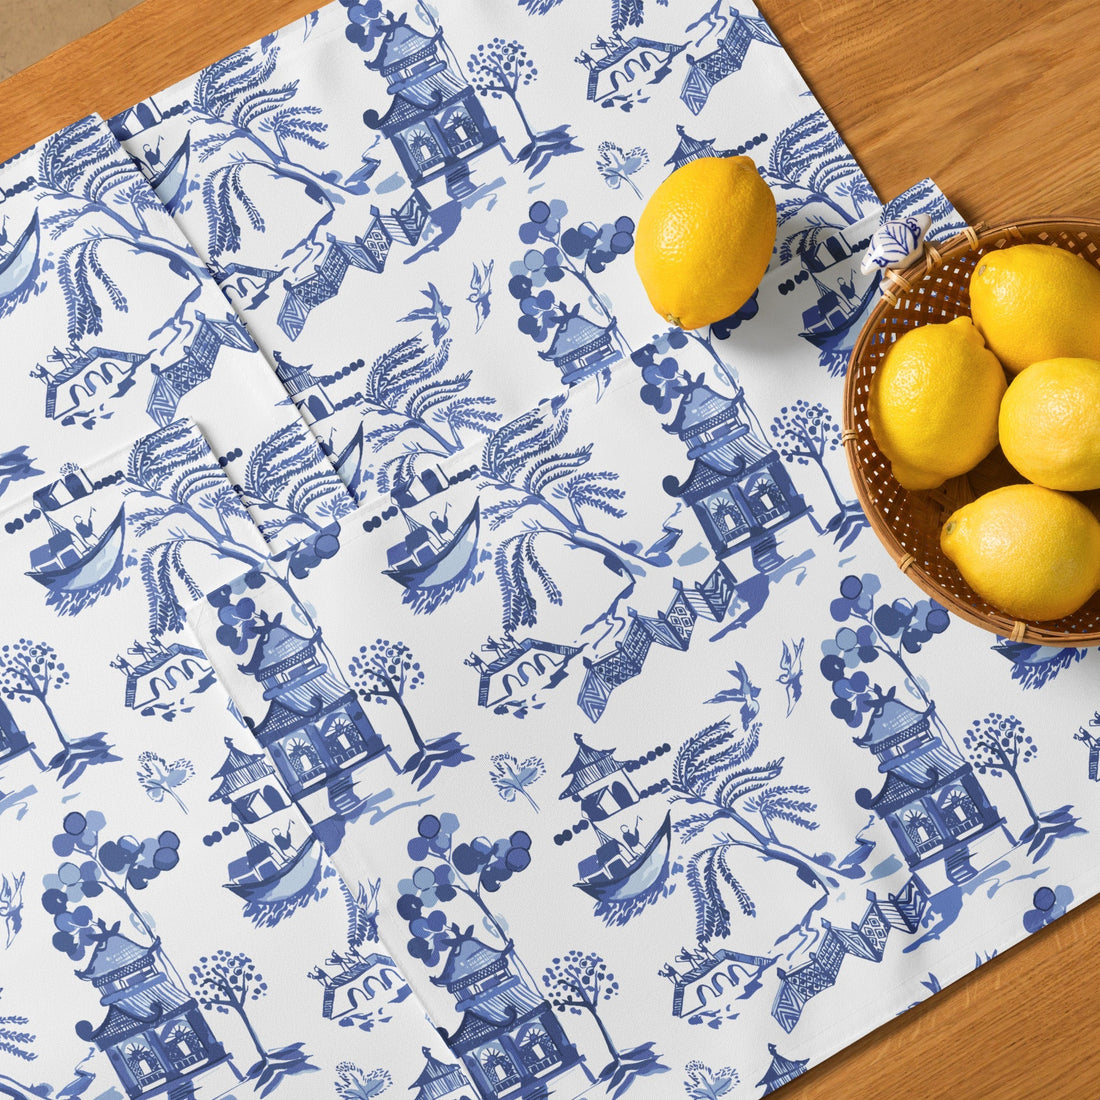 Kate McEnroe New York Blue Willow Chinoiserie Placemats, Set of 4, Classic Blue and White Table Mats, Oriental Dining DecorPlacemats9106838_17484